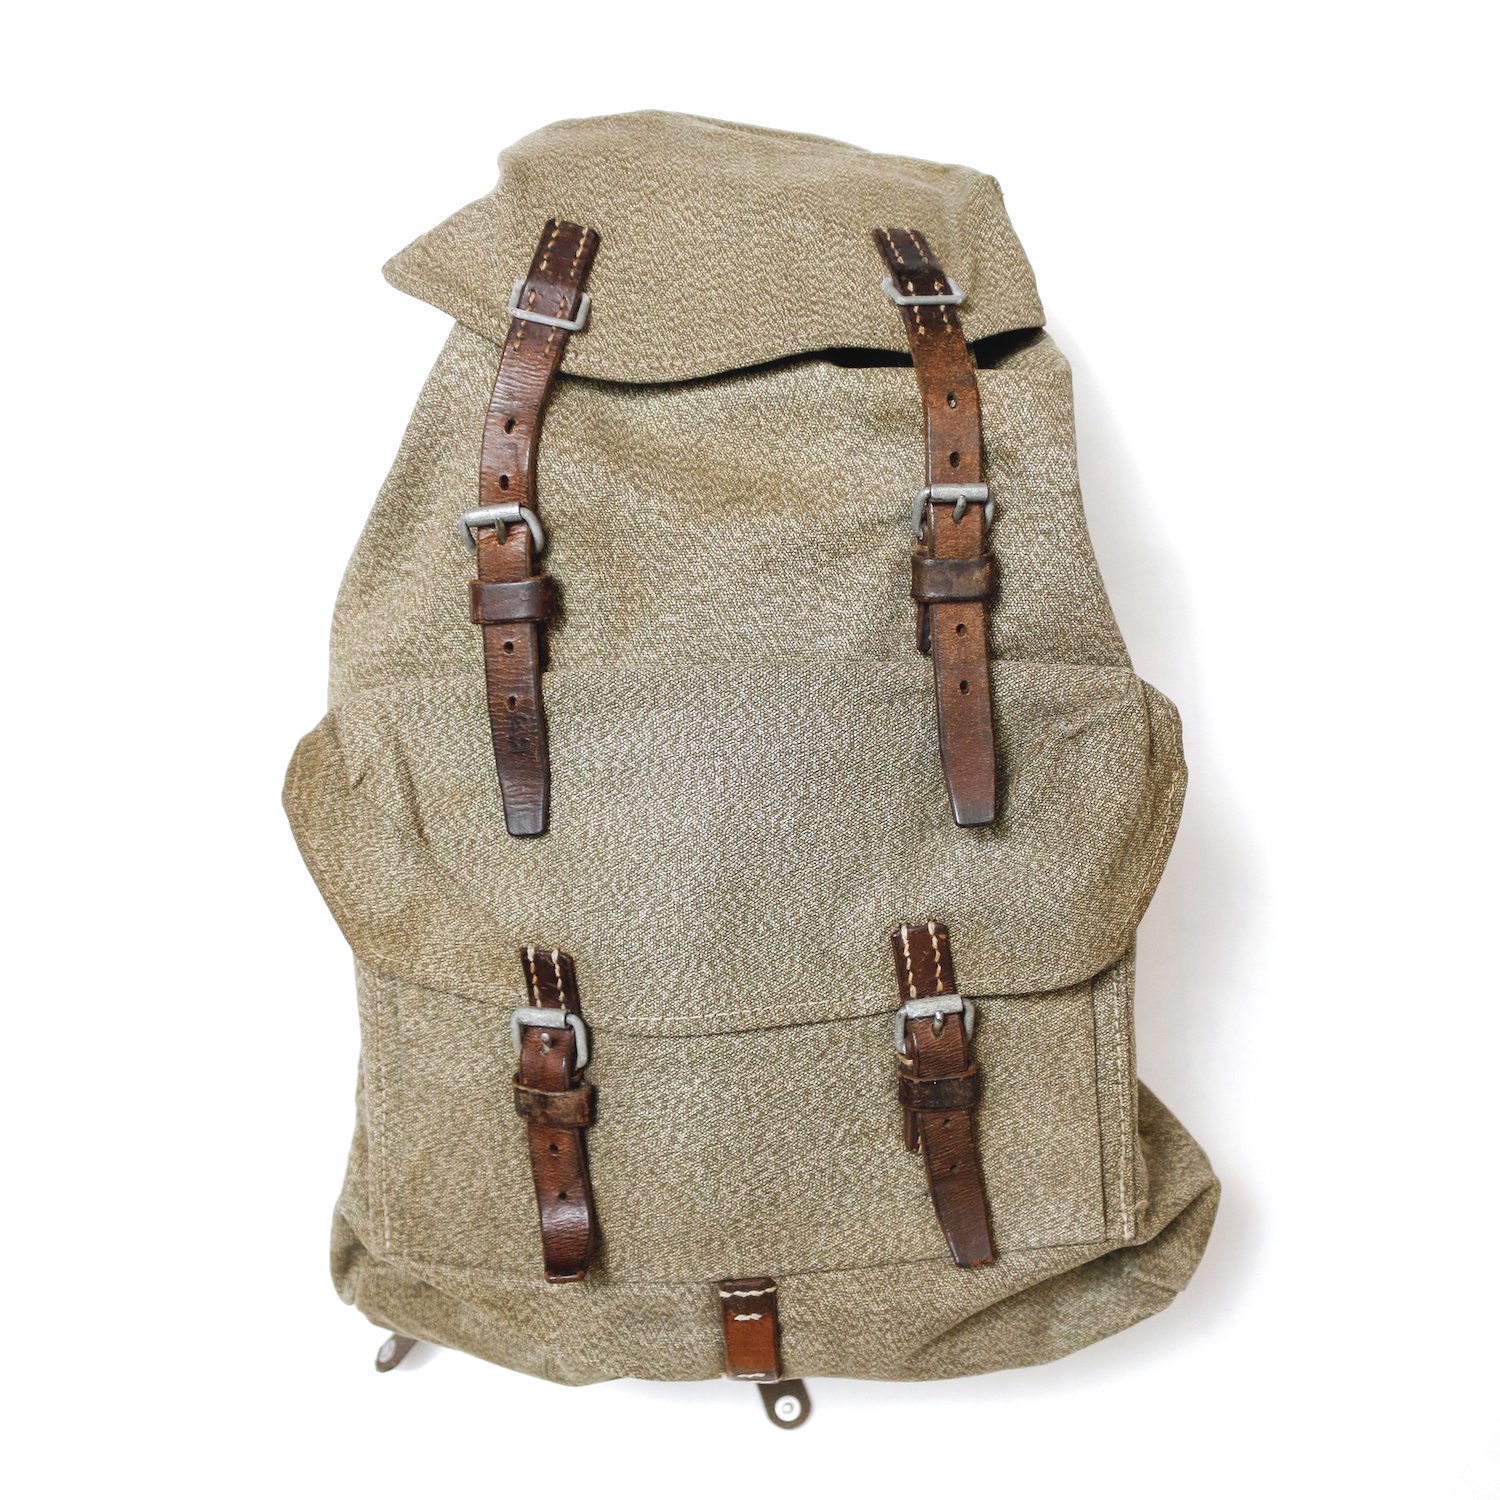 <img class='new_mark_img1' src='https://img.shop-pro.jp/img/new/icons20.gif' style='border:none;display:inline;margin:0px;padding:0px;width:auto;' />MILITARY /  58's Swiss Army Vintage Bag